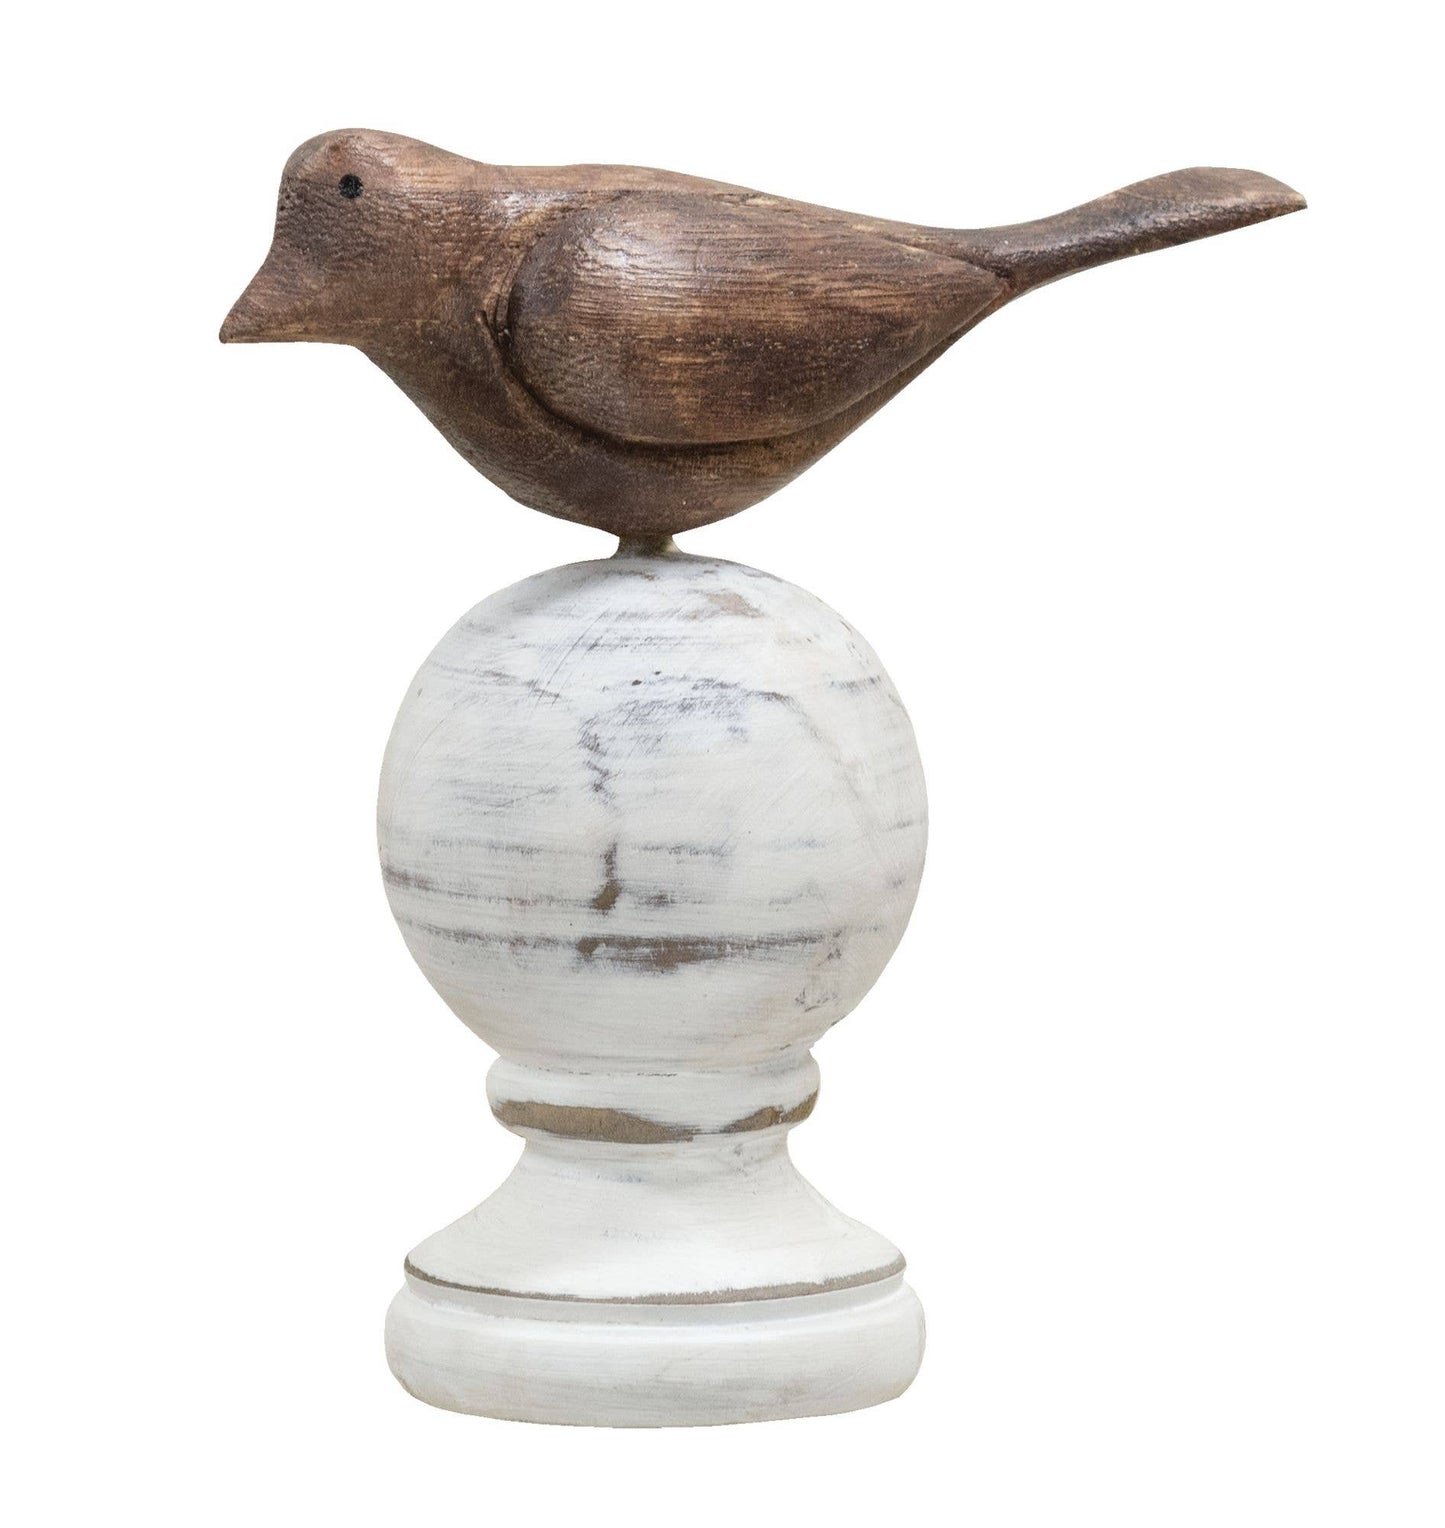 Wood Carved Bird Finial - 5.5"